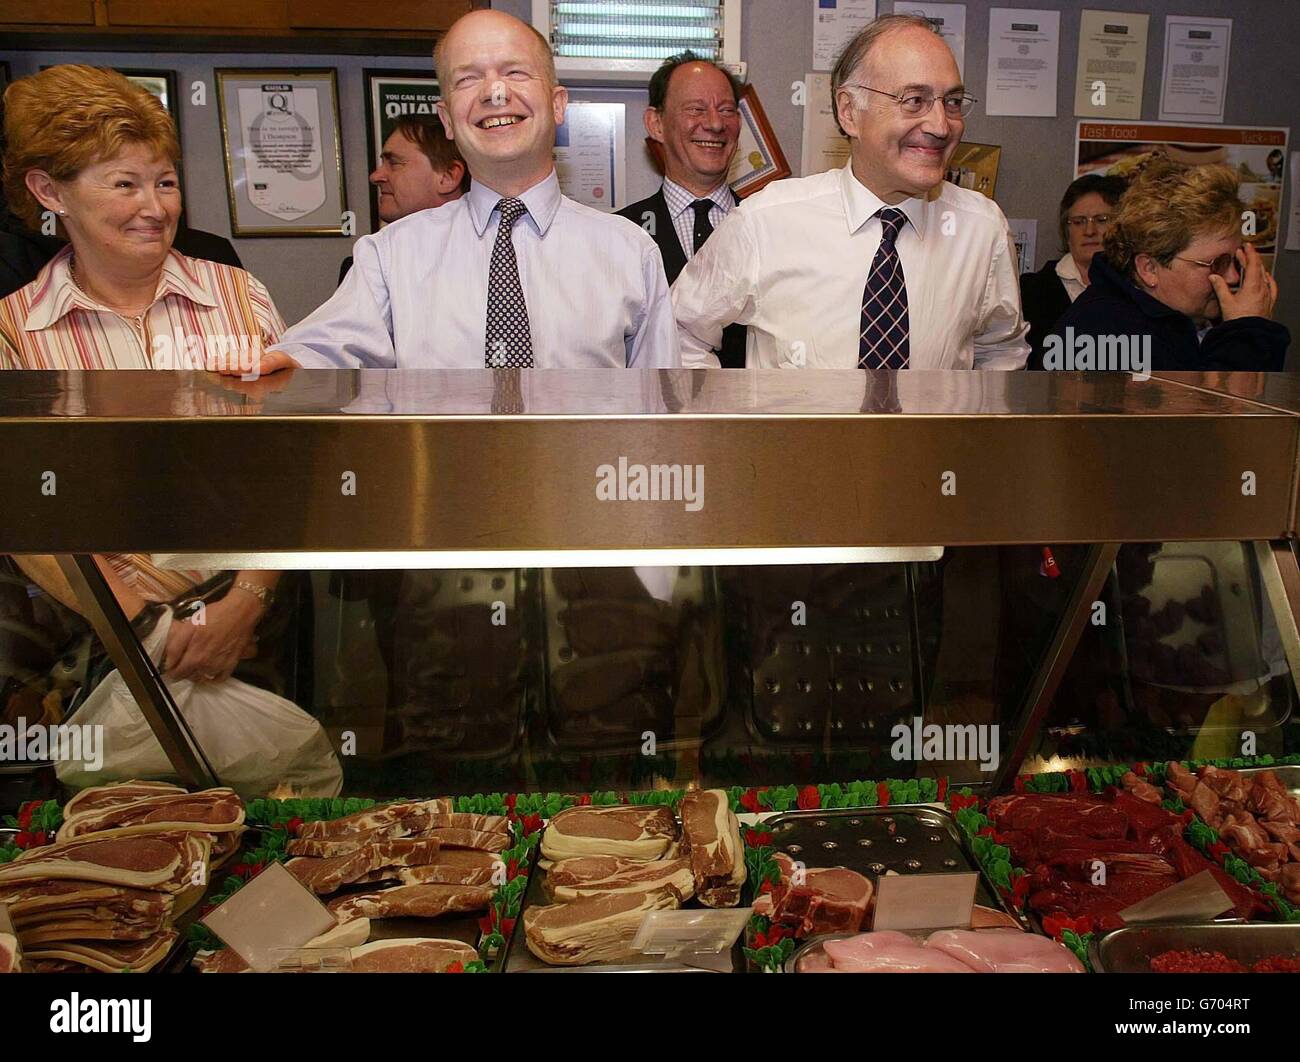 Conservative leader Michael Howard with former Tory leader William Hague (centre left) enter a local butcher shop during a visit to Northallerton, North Yorkshire. Howard earlier launched a blistering attack on the Labour Party and the Liberal Democrats accusing them of leading Britain into the 'straight-jacket' of Europe. Stock Photo